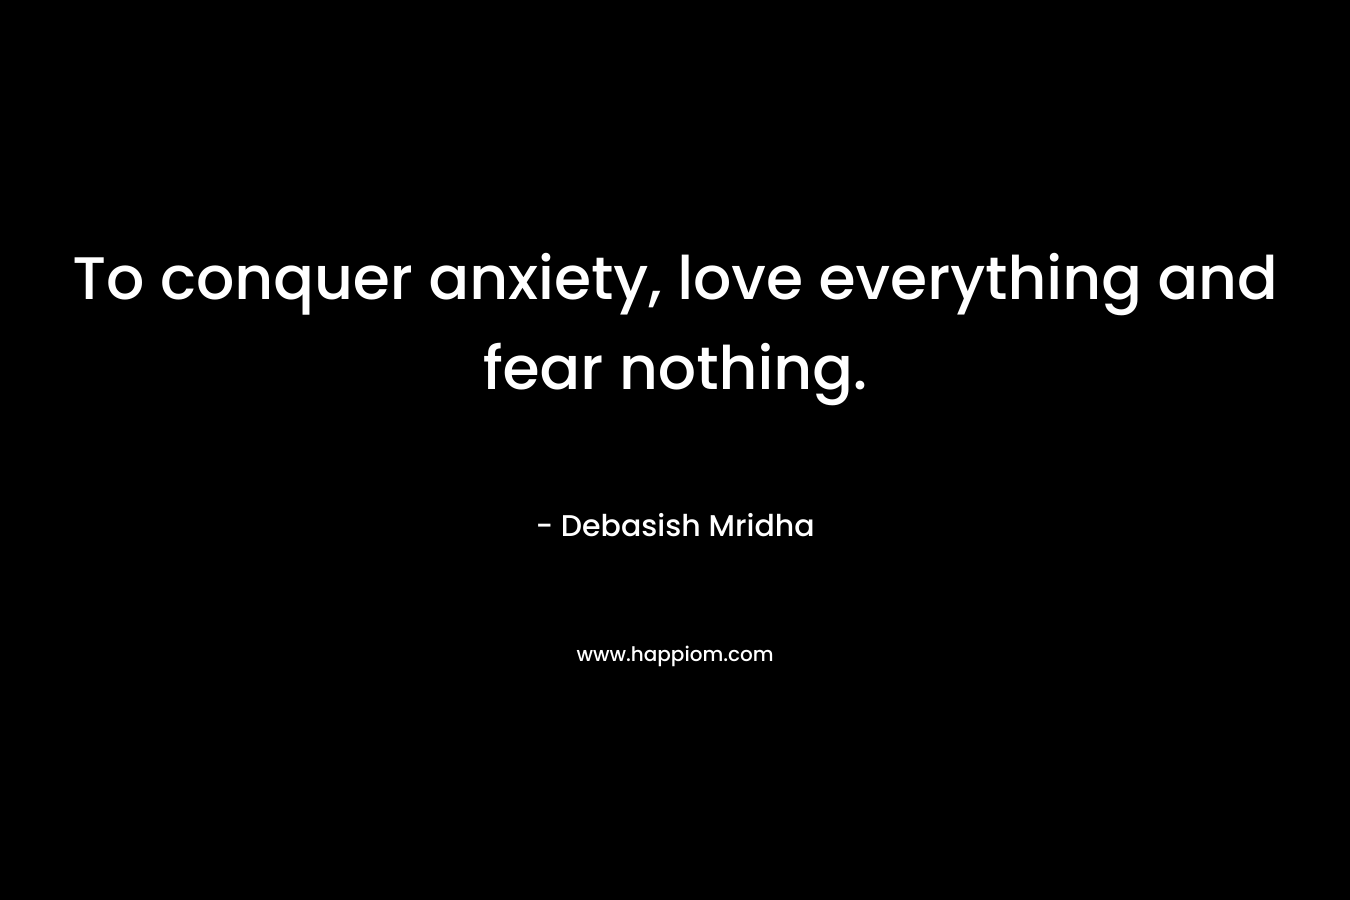 To conquer anxiety, love everything and fear nothing.